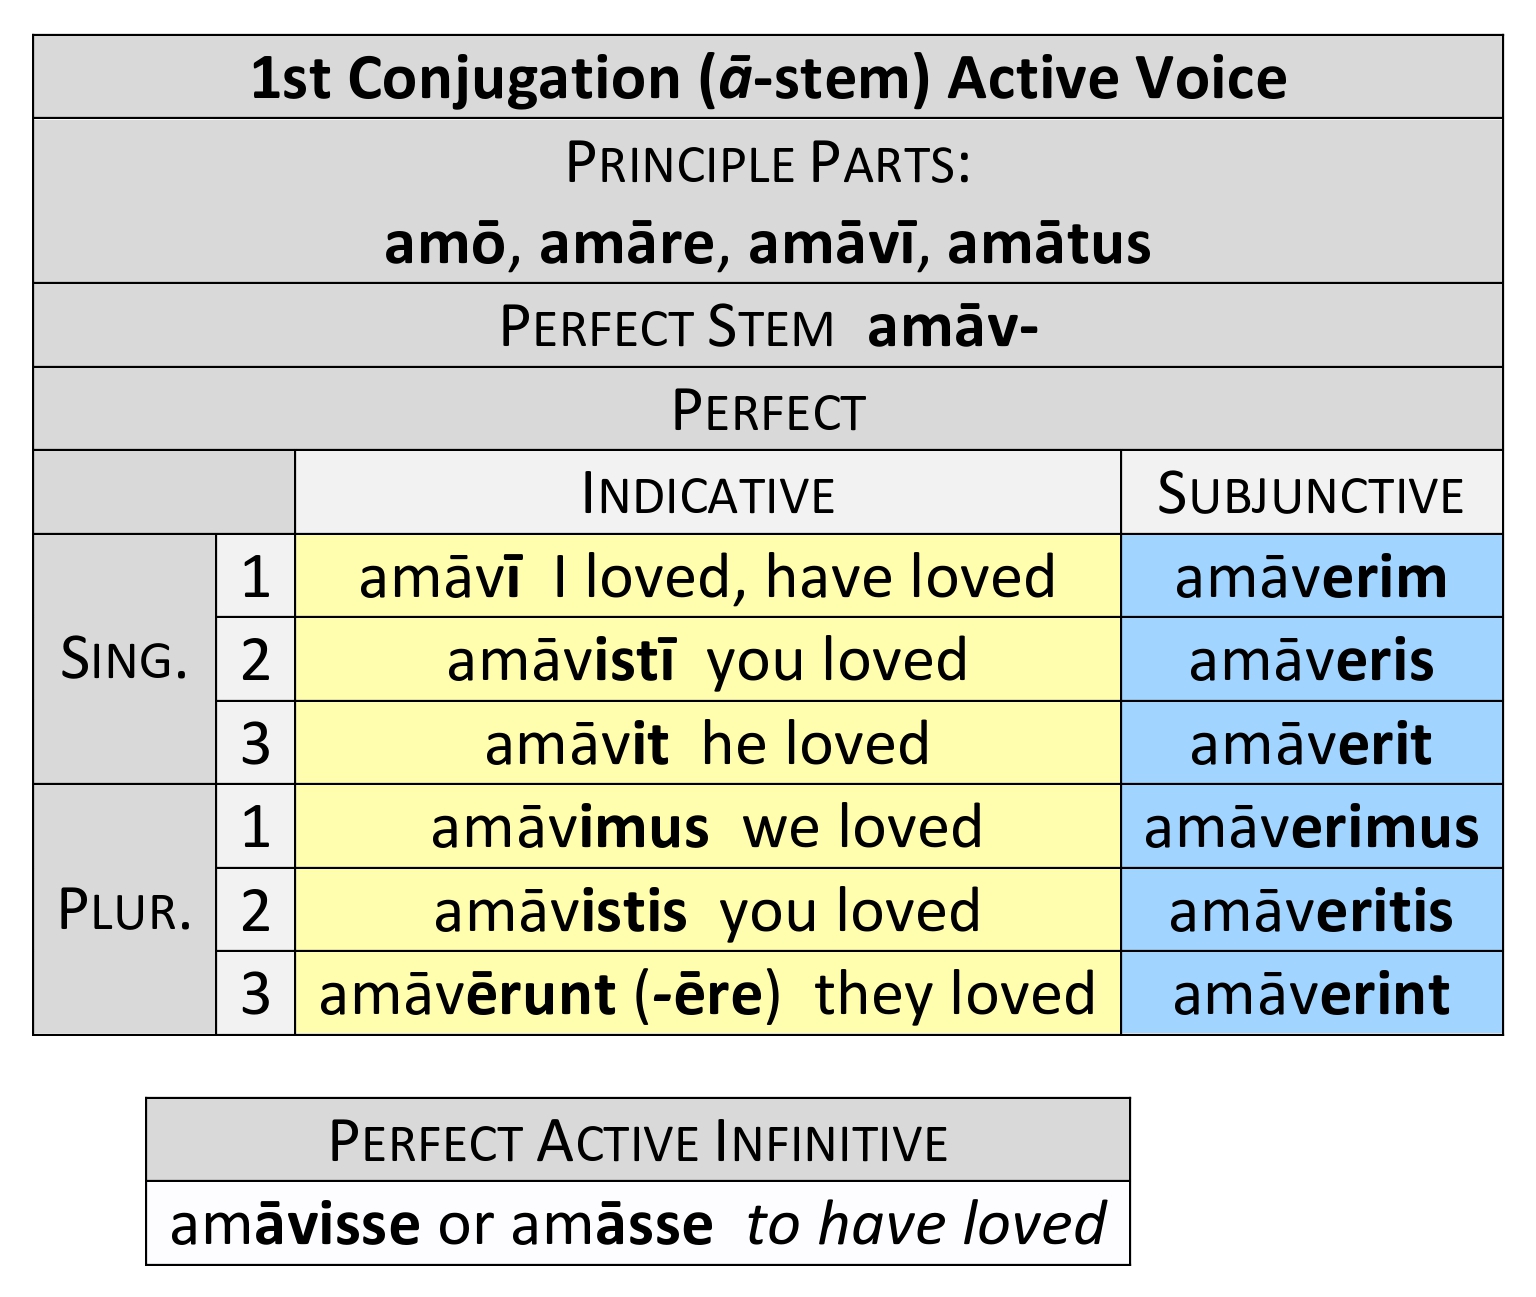 Perfect active conjugation of amō